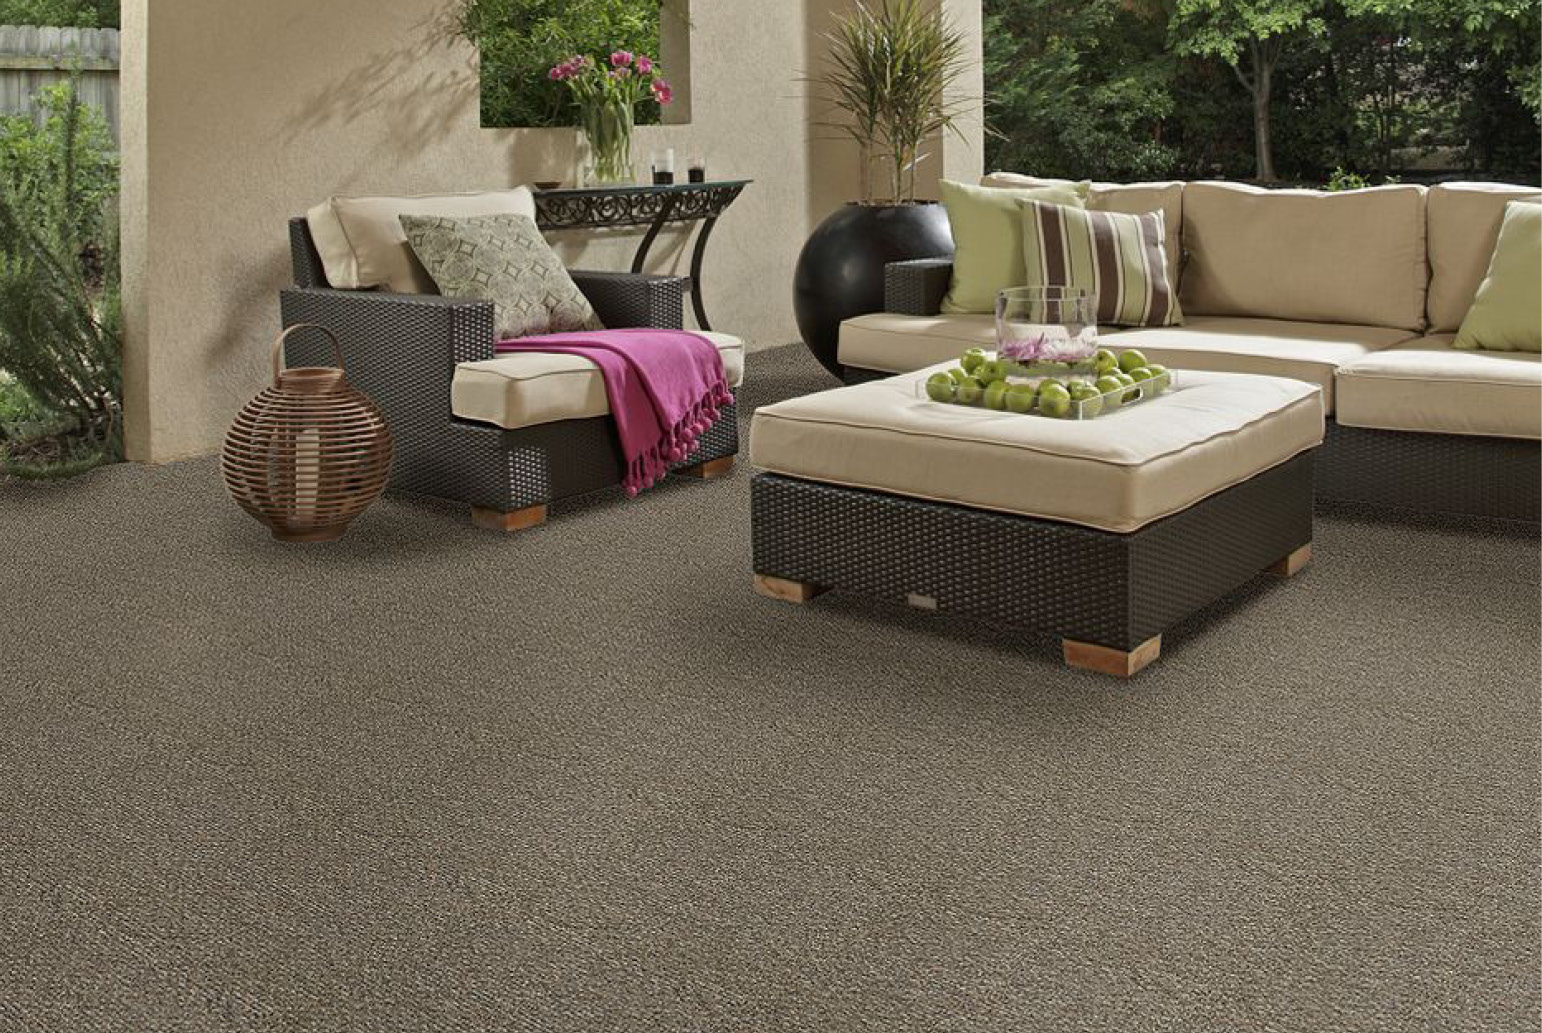 outdoor carpeting outdoor carpet is a wonderful option when it comes to outdoor patio flooring PBJTLRG